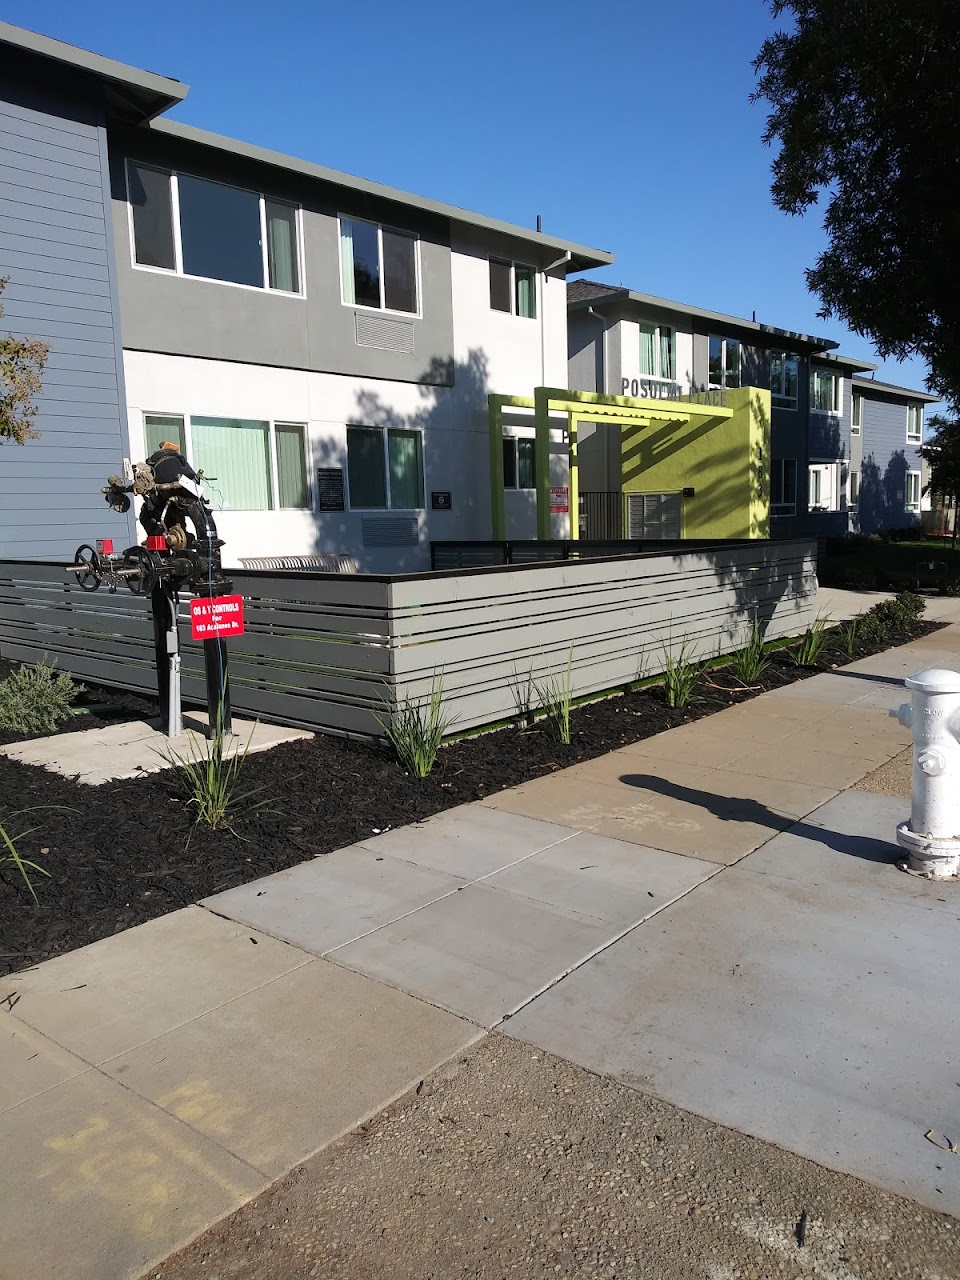 Photo of POSOLMI PLACE (FKA: EIGHT TREES APARTMENTS). Affordable housing located at 183 ACALANES DRIVE SUNNYVALE, CA 94086